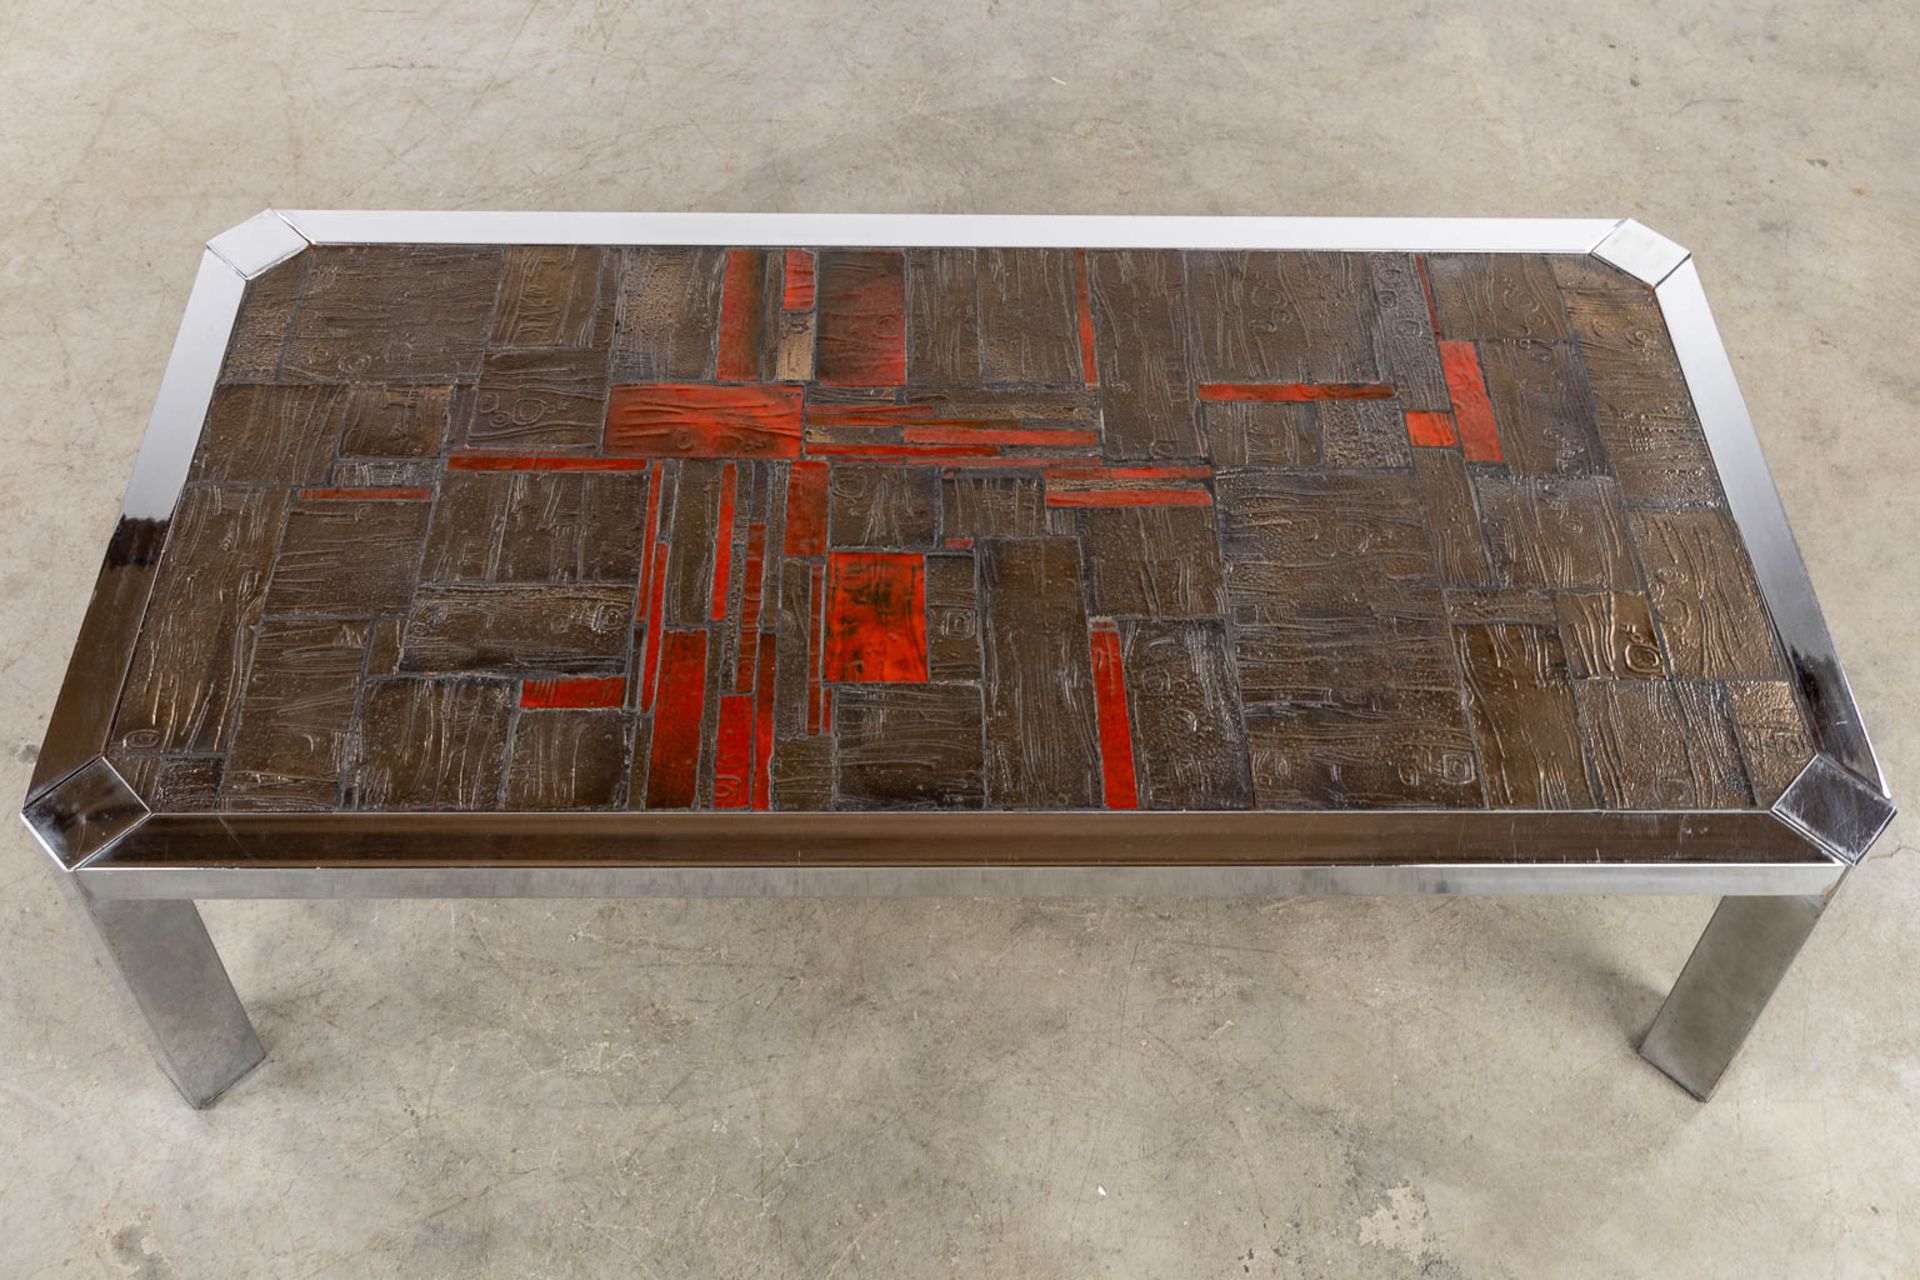 A mid-century coffee table with a ceramic tile top, circa 1960. (L:60 x W:120 x H:36 cm) - Image 7 of 10